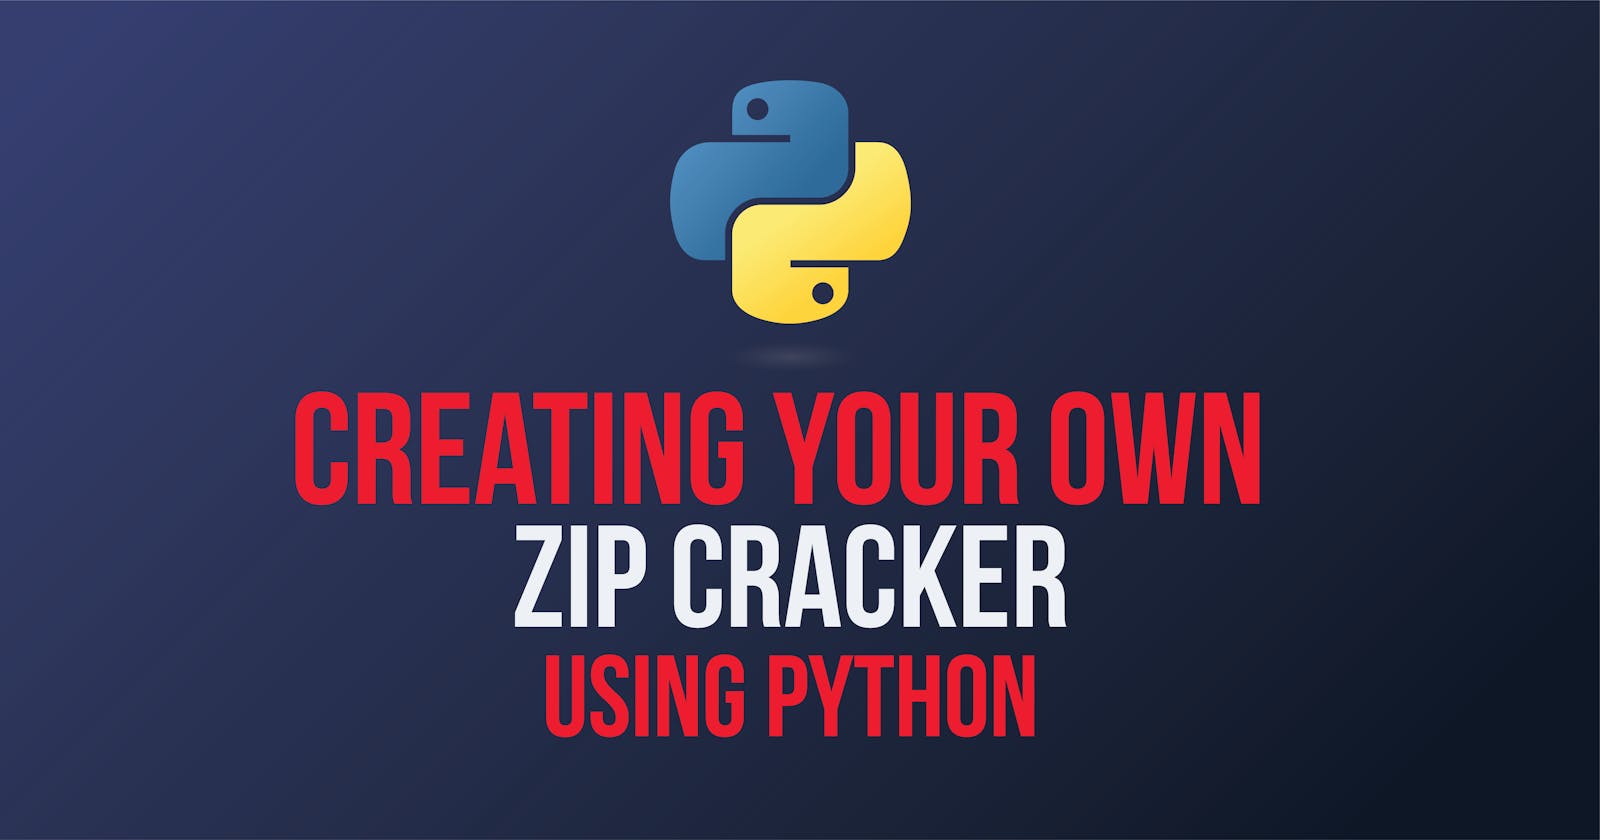 How to Brute Force ZIP File Passwords in Python